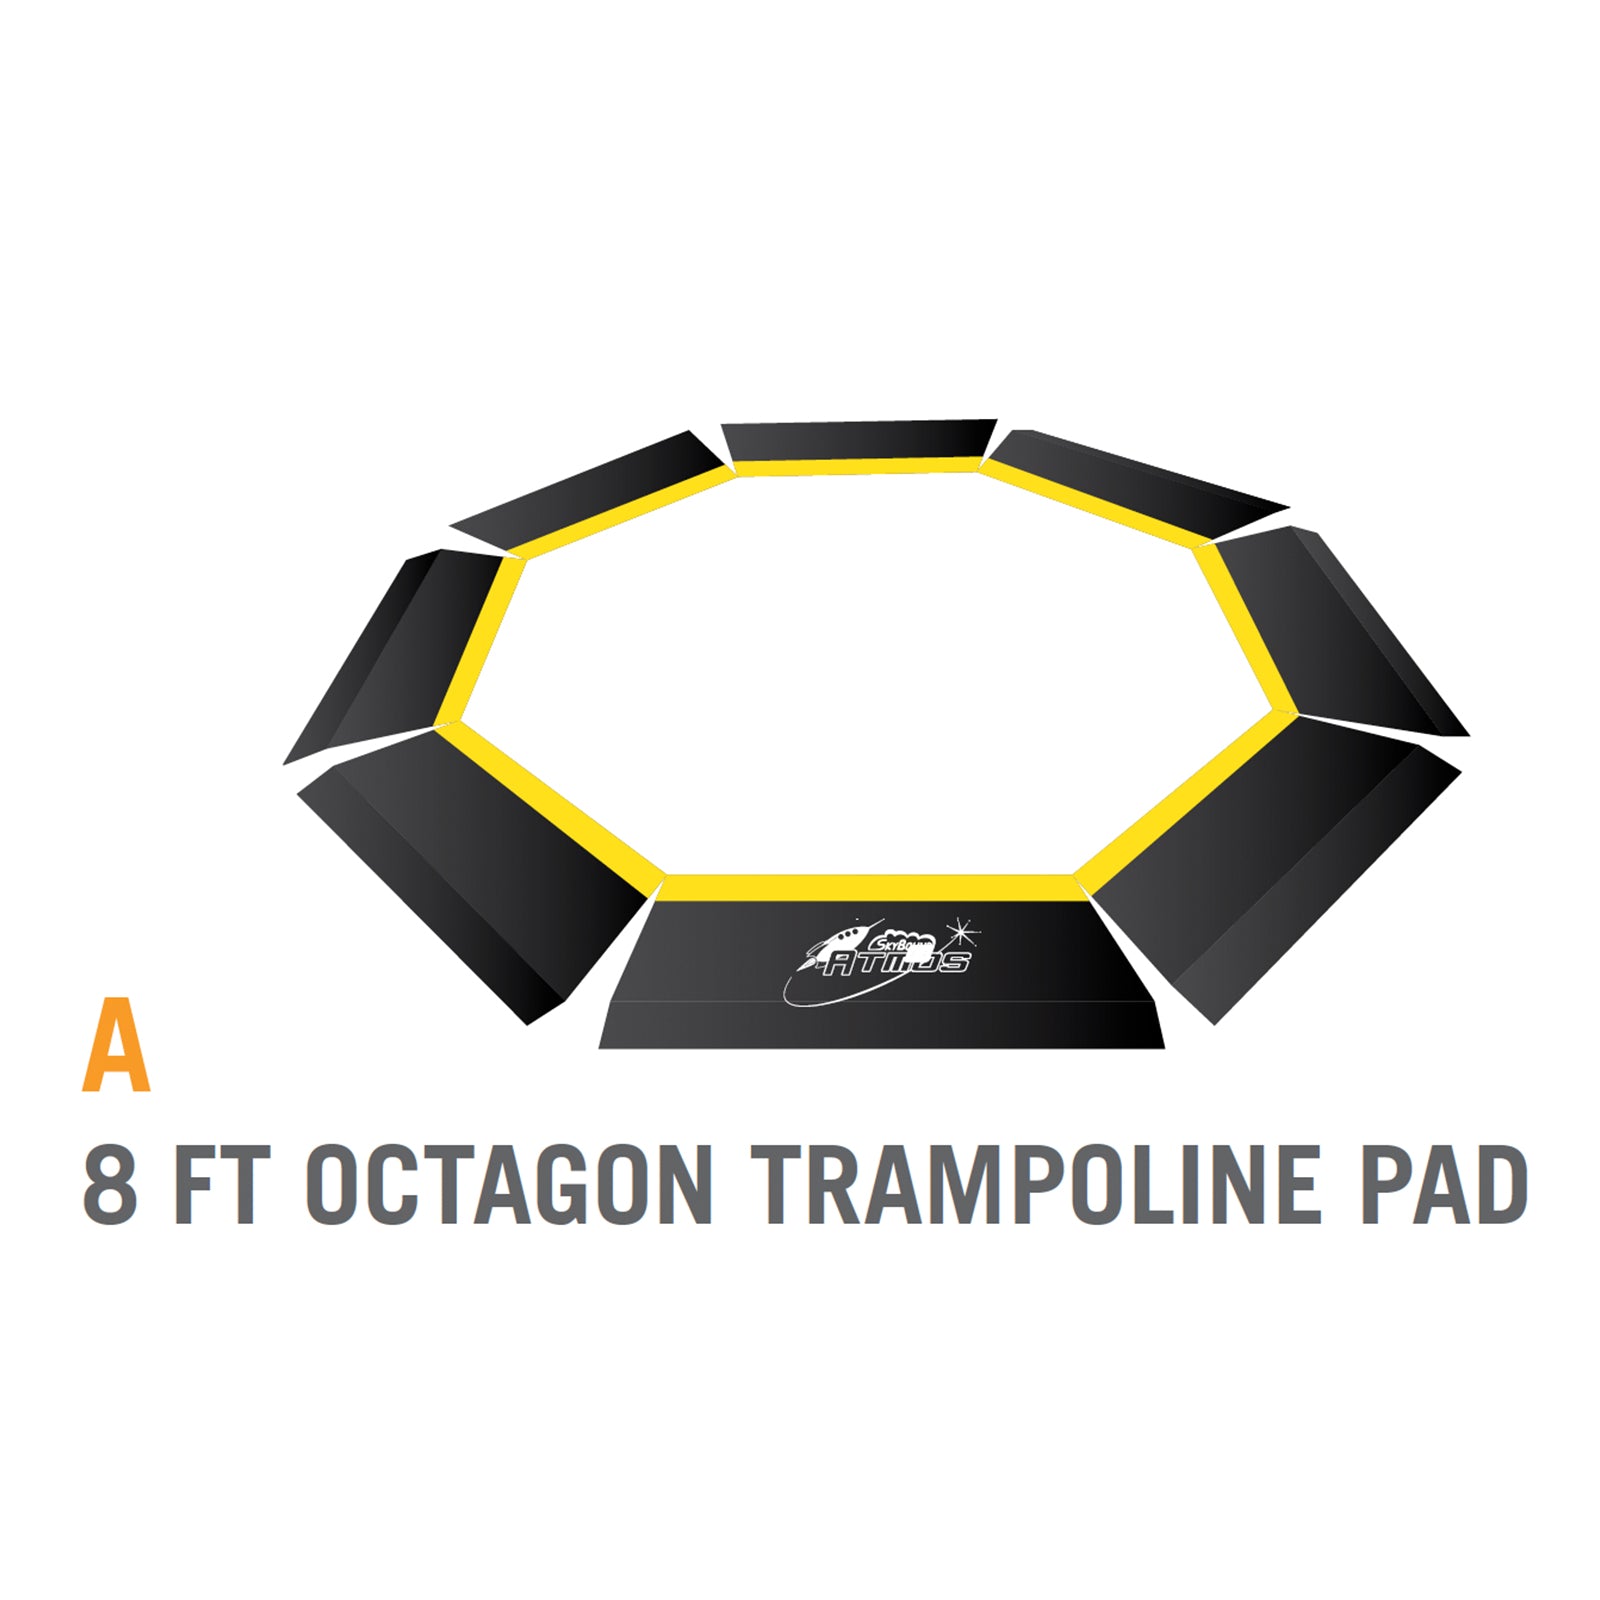 8 Ft Octagon Trampoline Pad for 8 foot Atmos Trampoline Black (Part A)